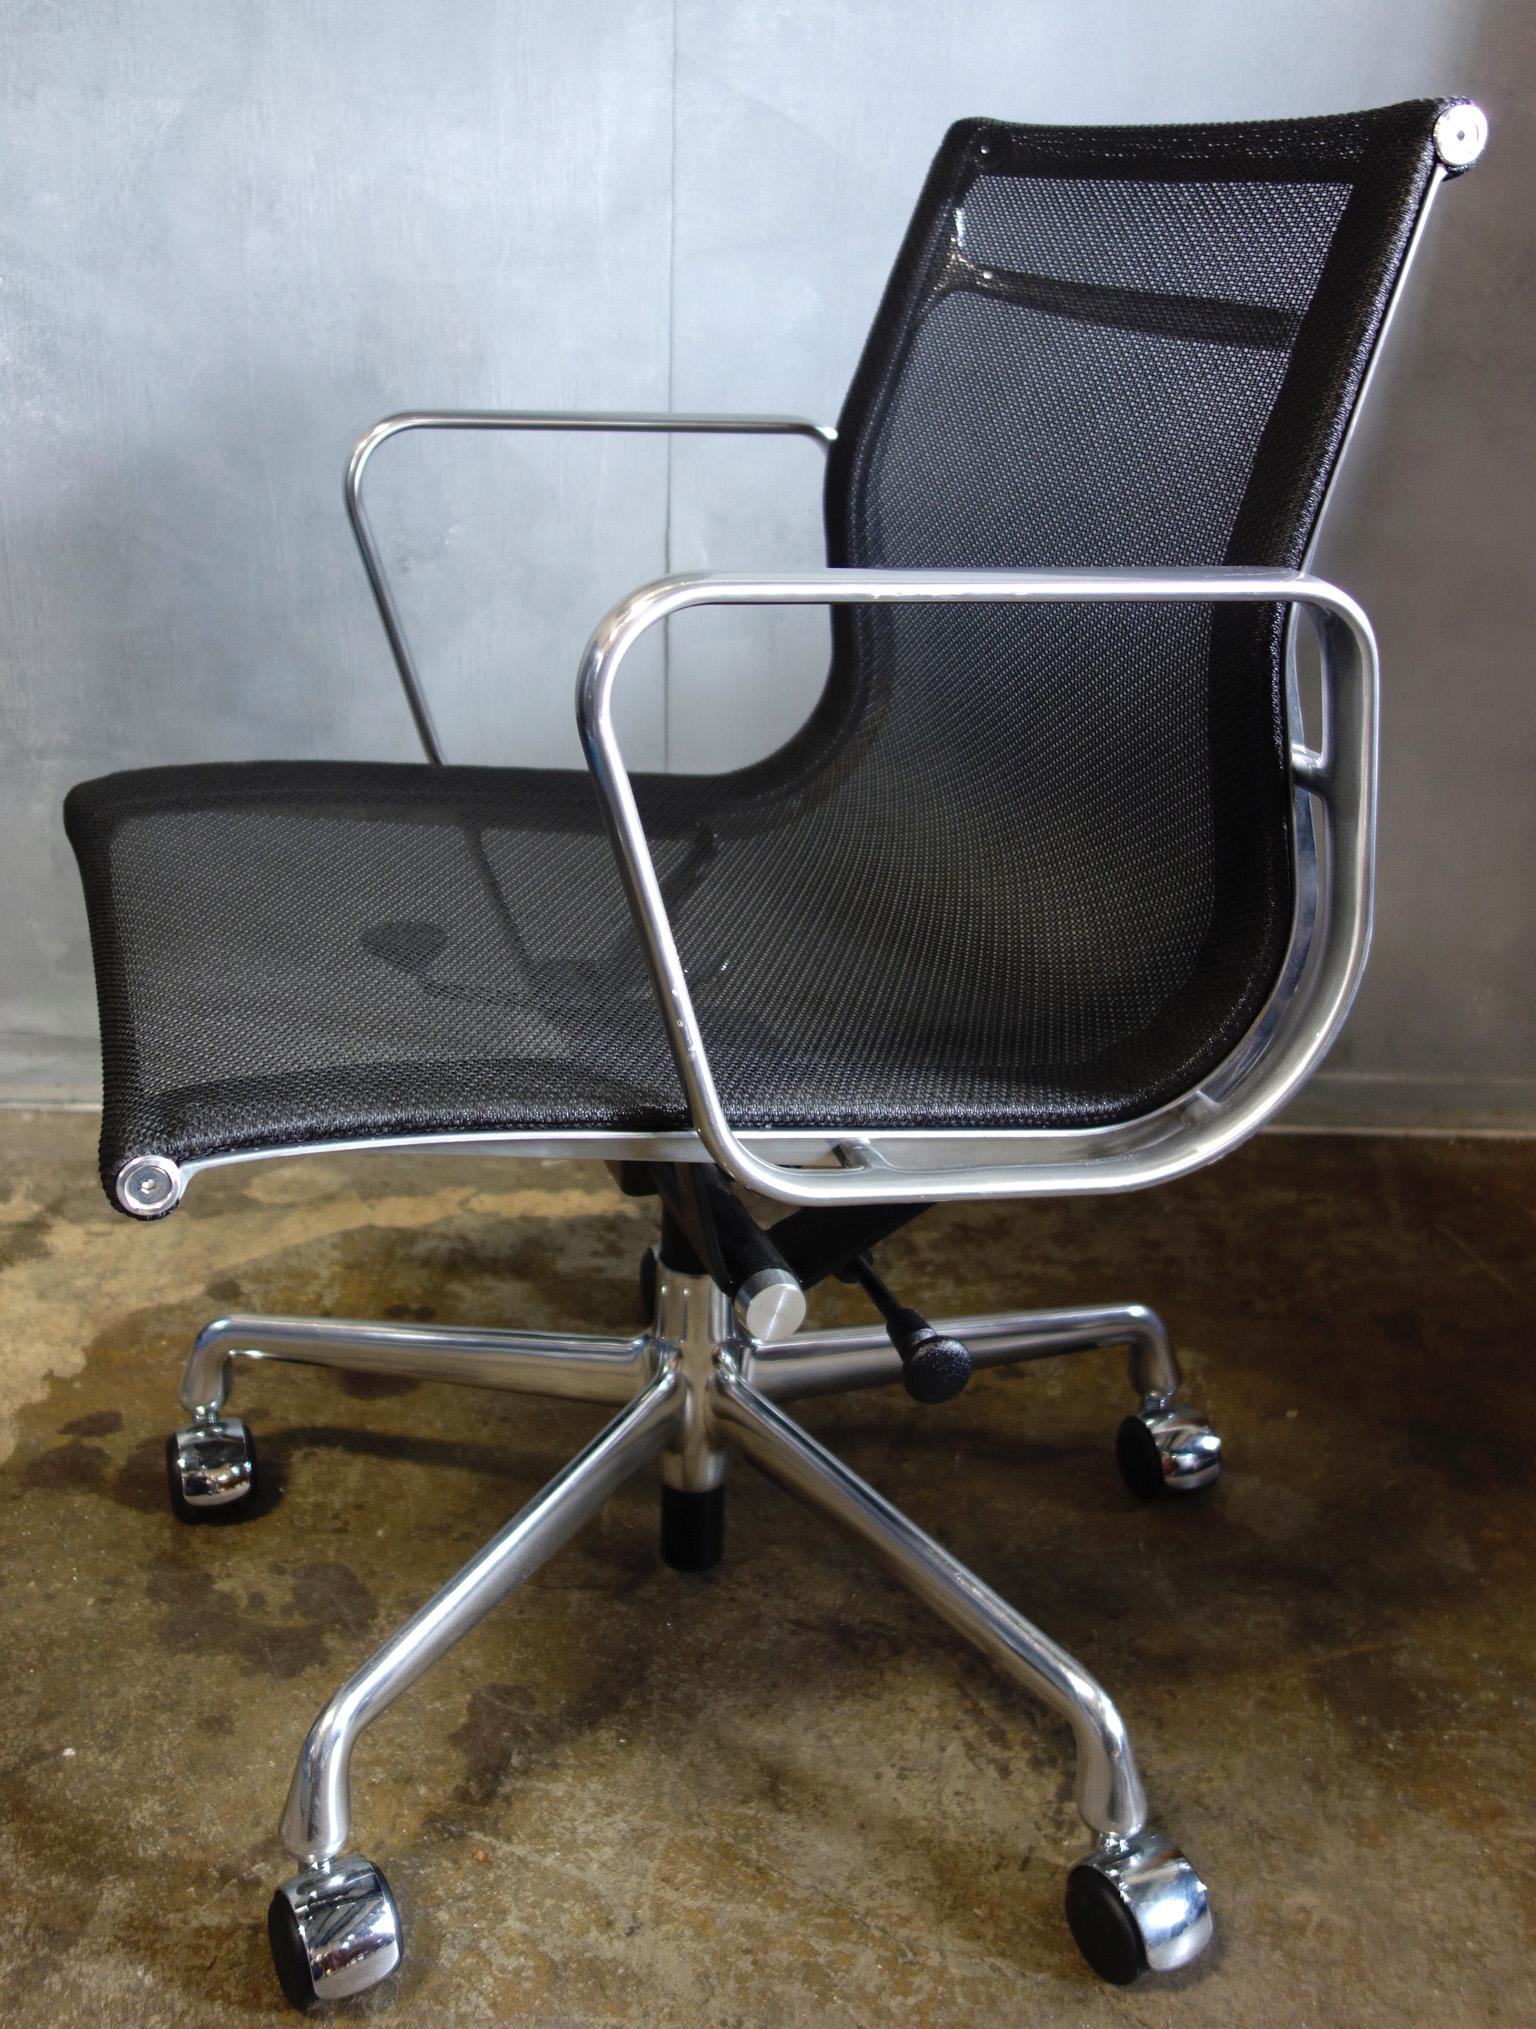 For your consideration are up to 20 midcentury Eames Management chairs upholstered in mesh with pneumatic lift. Elegance and comfort separates this iconic chair from the rest. First produced in 1958 and still in production makes this one of the most